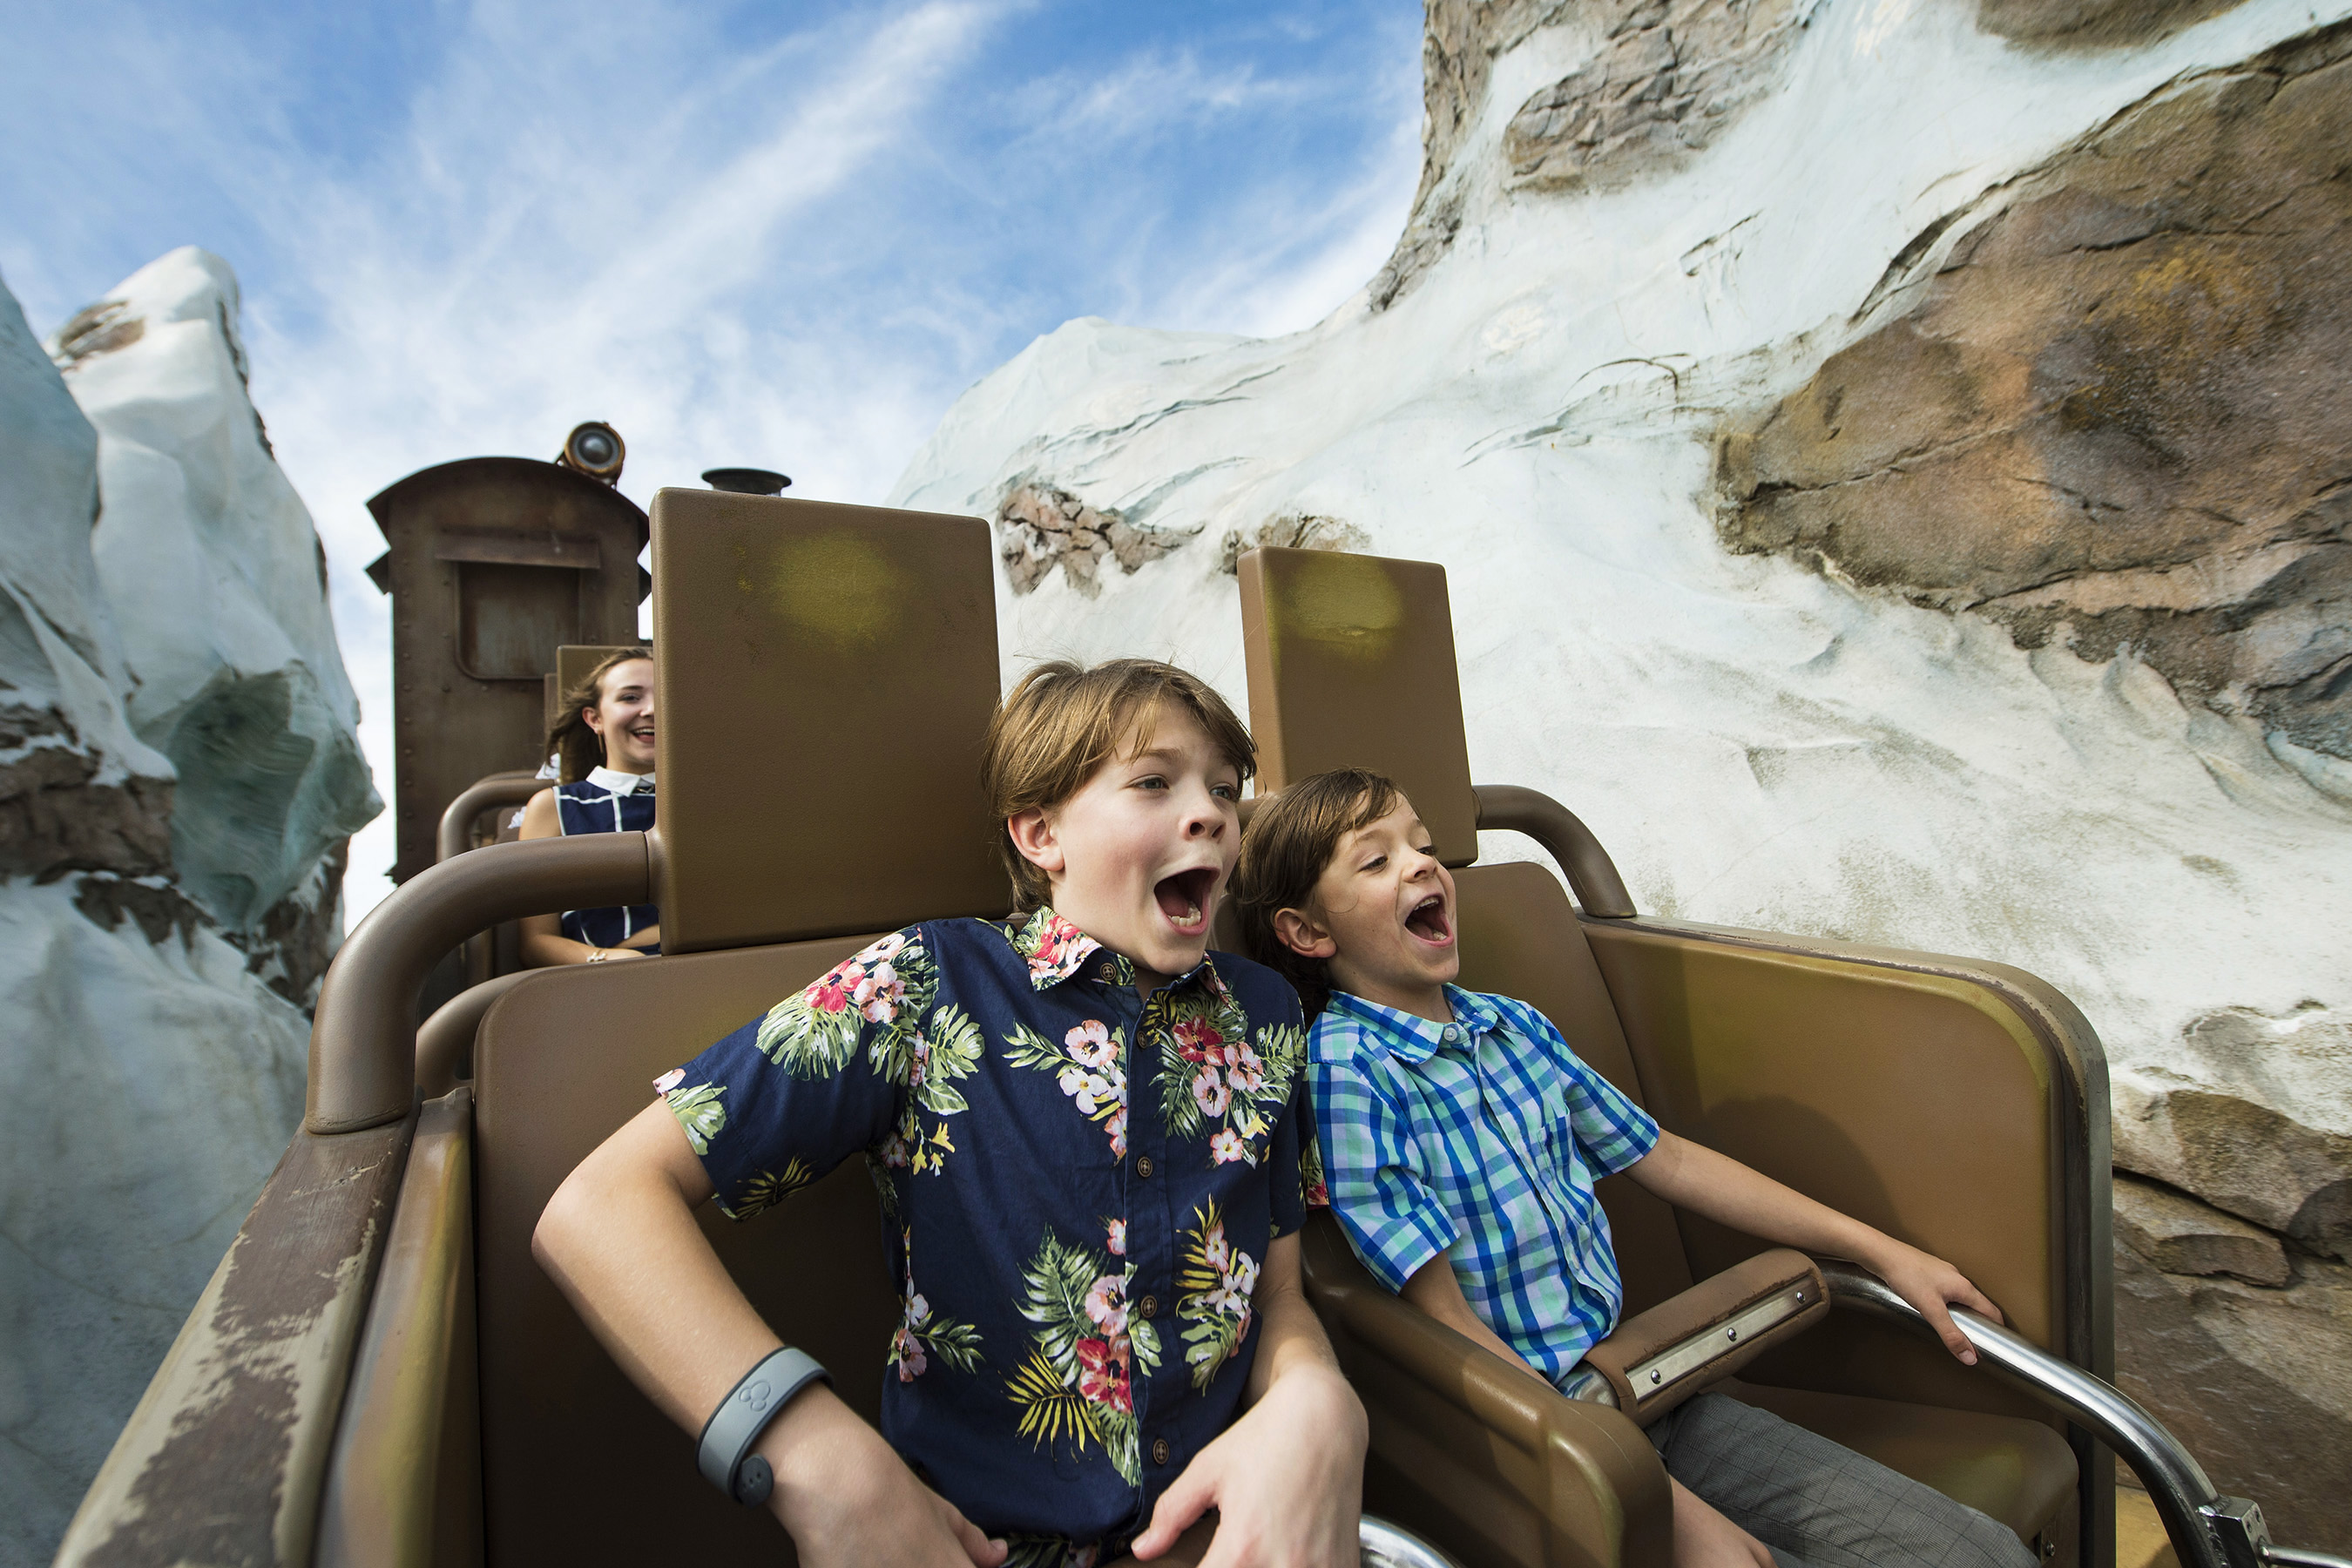 Kids (from Pete's Dragon) on Expedition: Everest